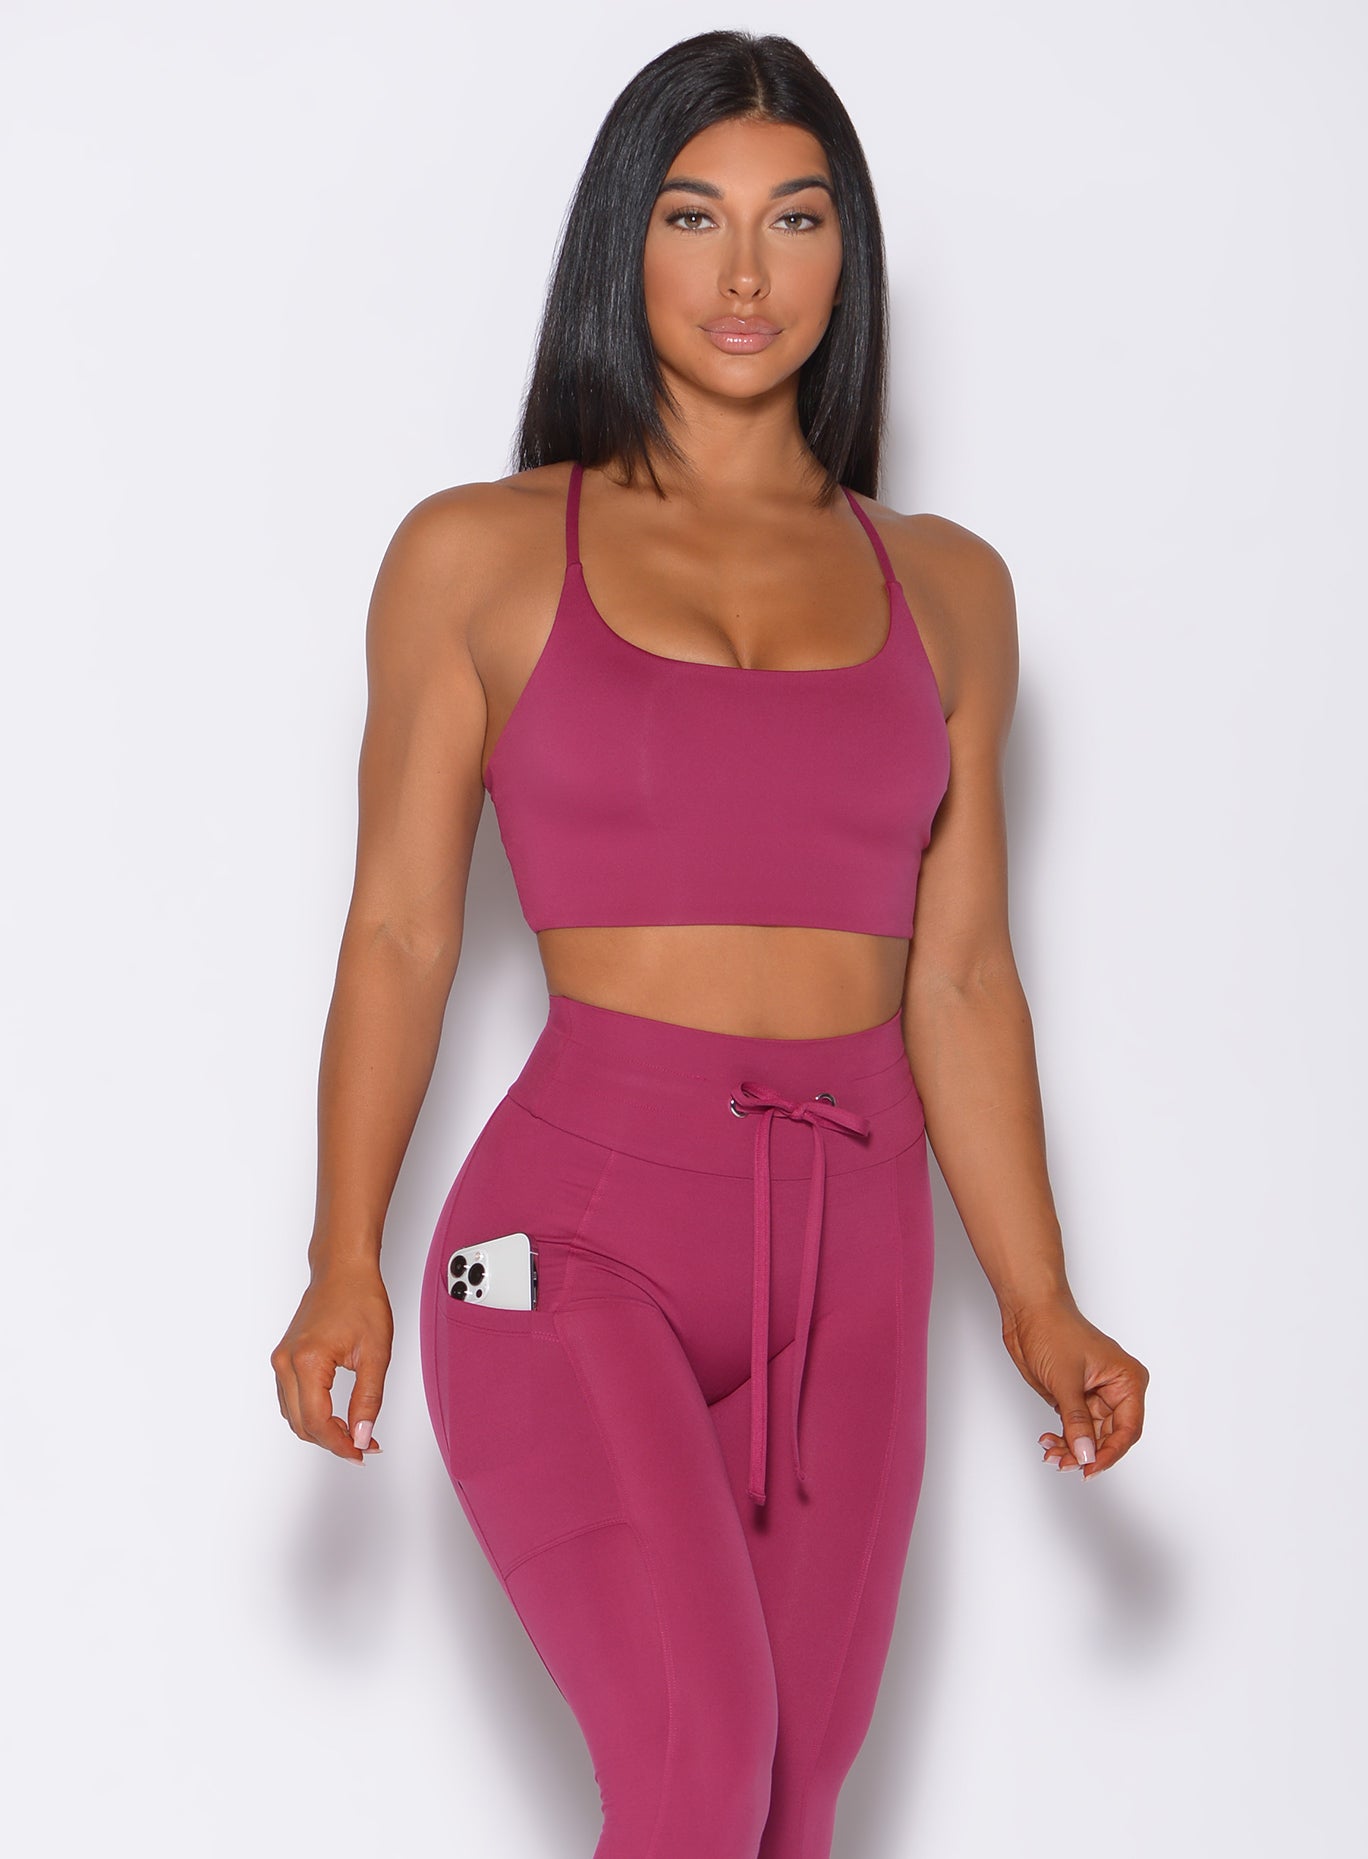 Front profile view of a model wearing our cross fit sports bra in berry good color and a matching leggings